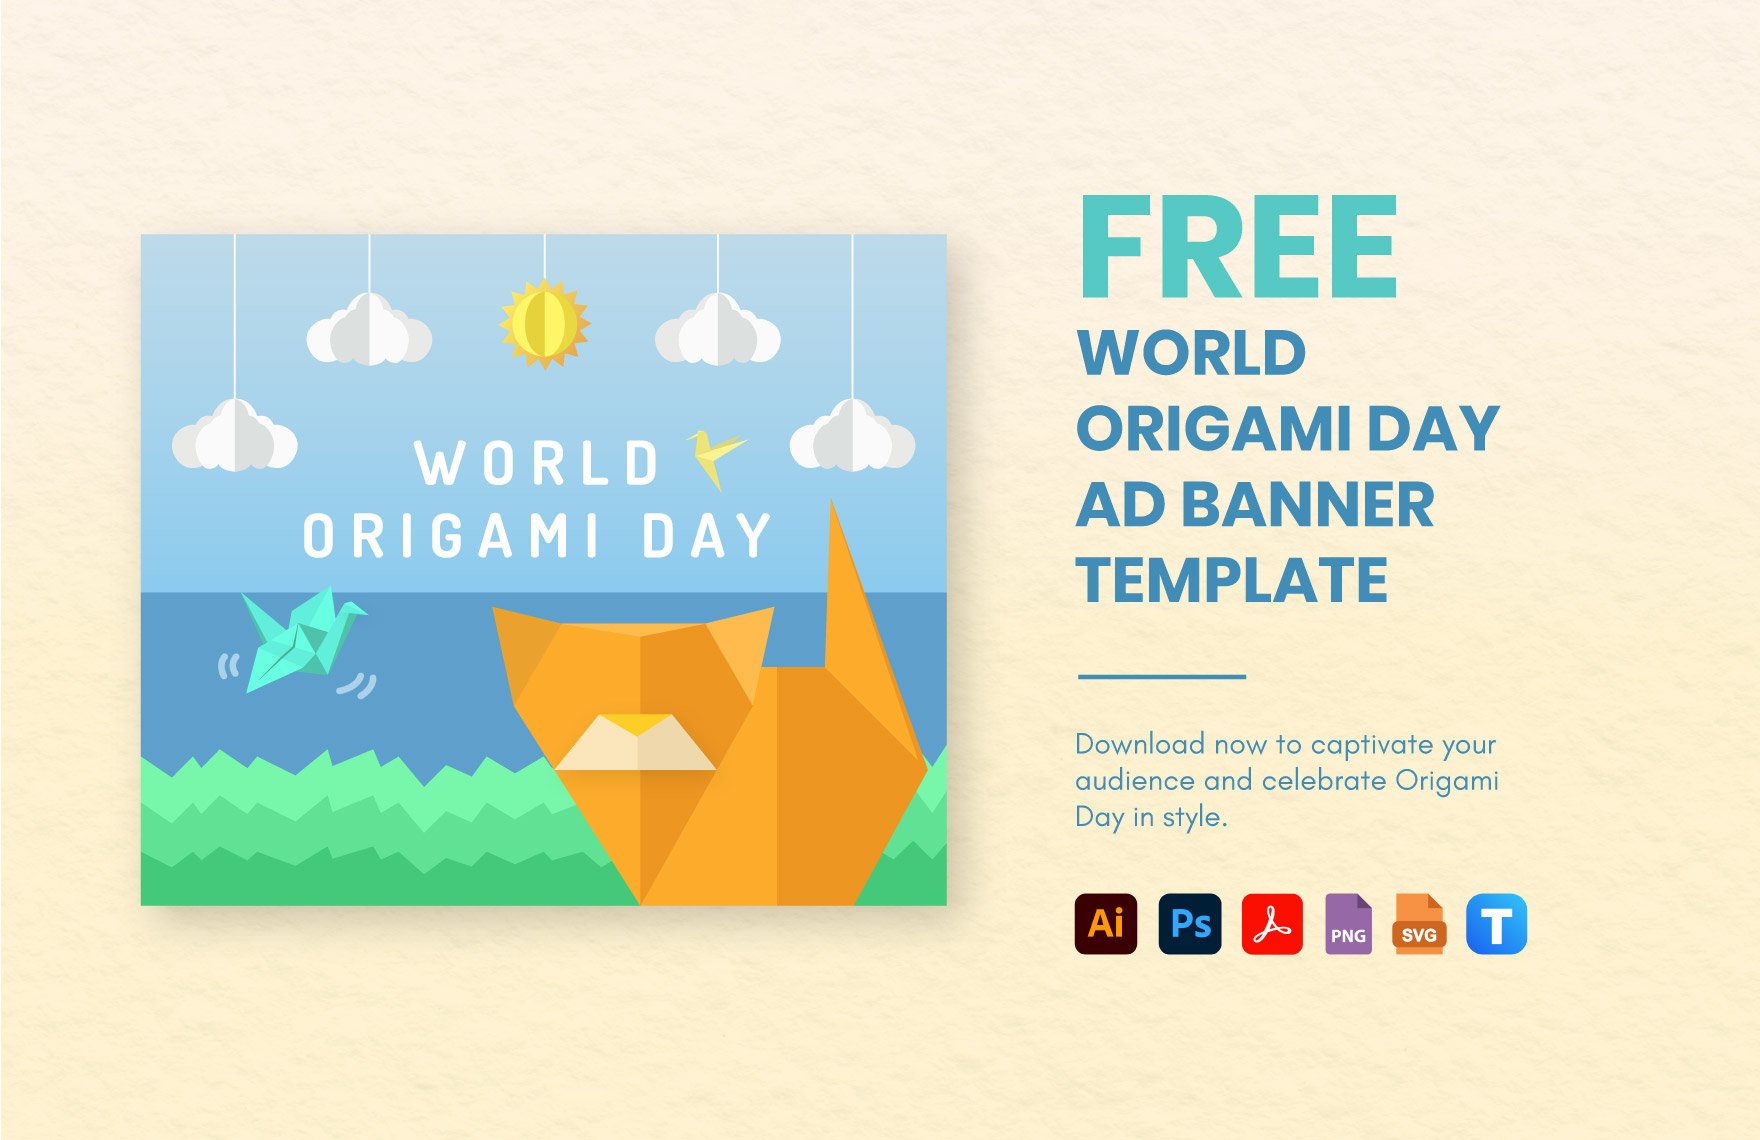 Free World Origami Day Ad Banner Template in PDF, Illustrator, PSD, SVG, PNG